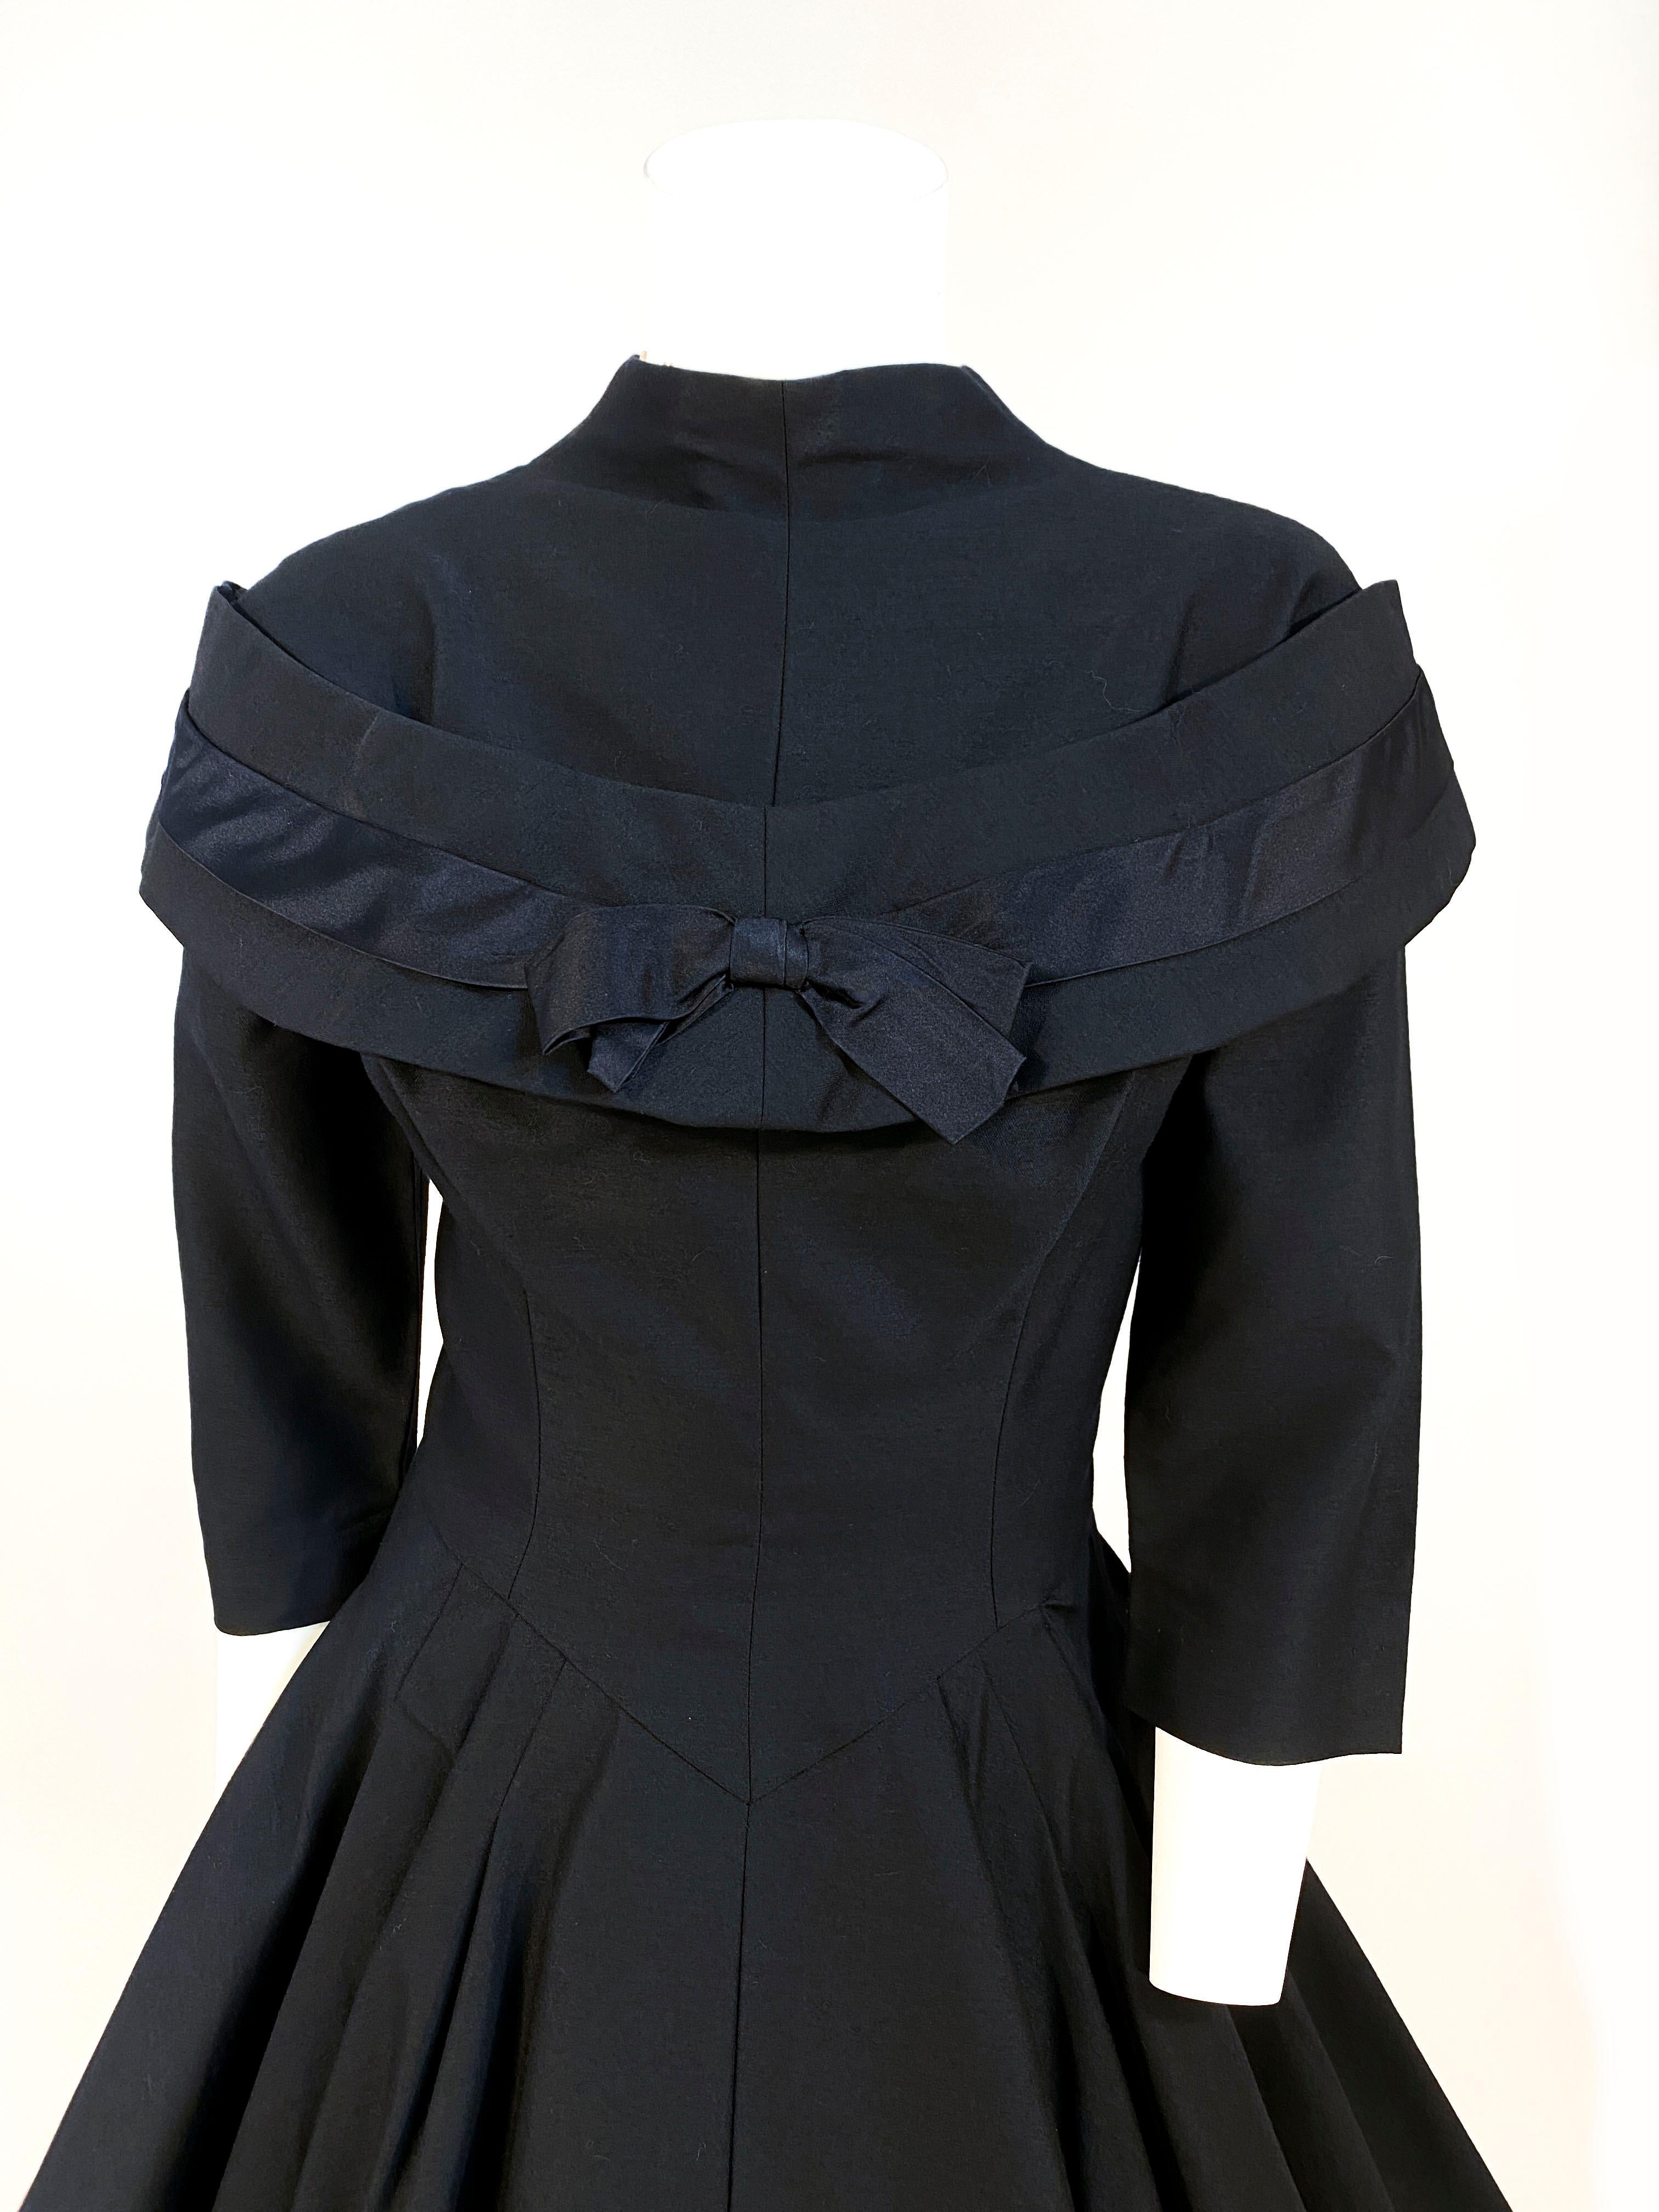 1950s Suzy Perette black wool cocktail dress with a full circle skirt backed in peplum for extra structure. The sleeves are three-quarter length, the neckline is high with a decorative secondary collar done in layers of wool and satin, finished with